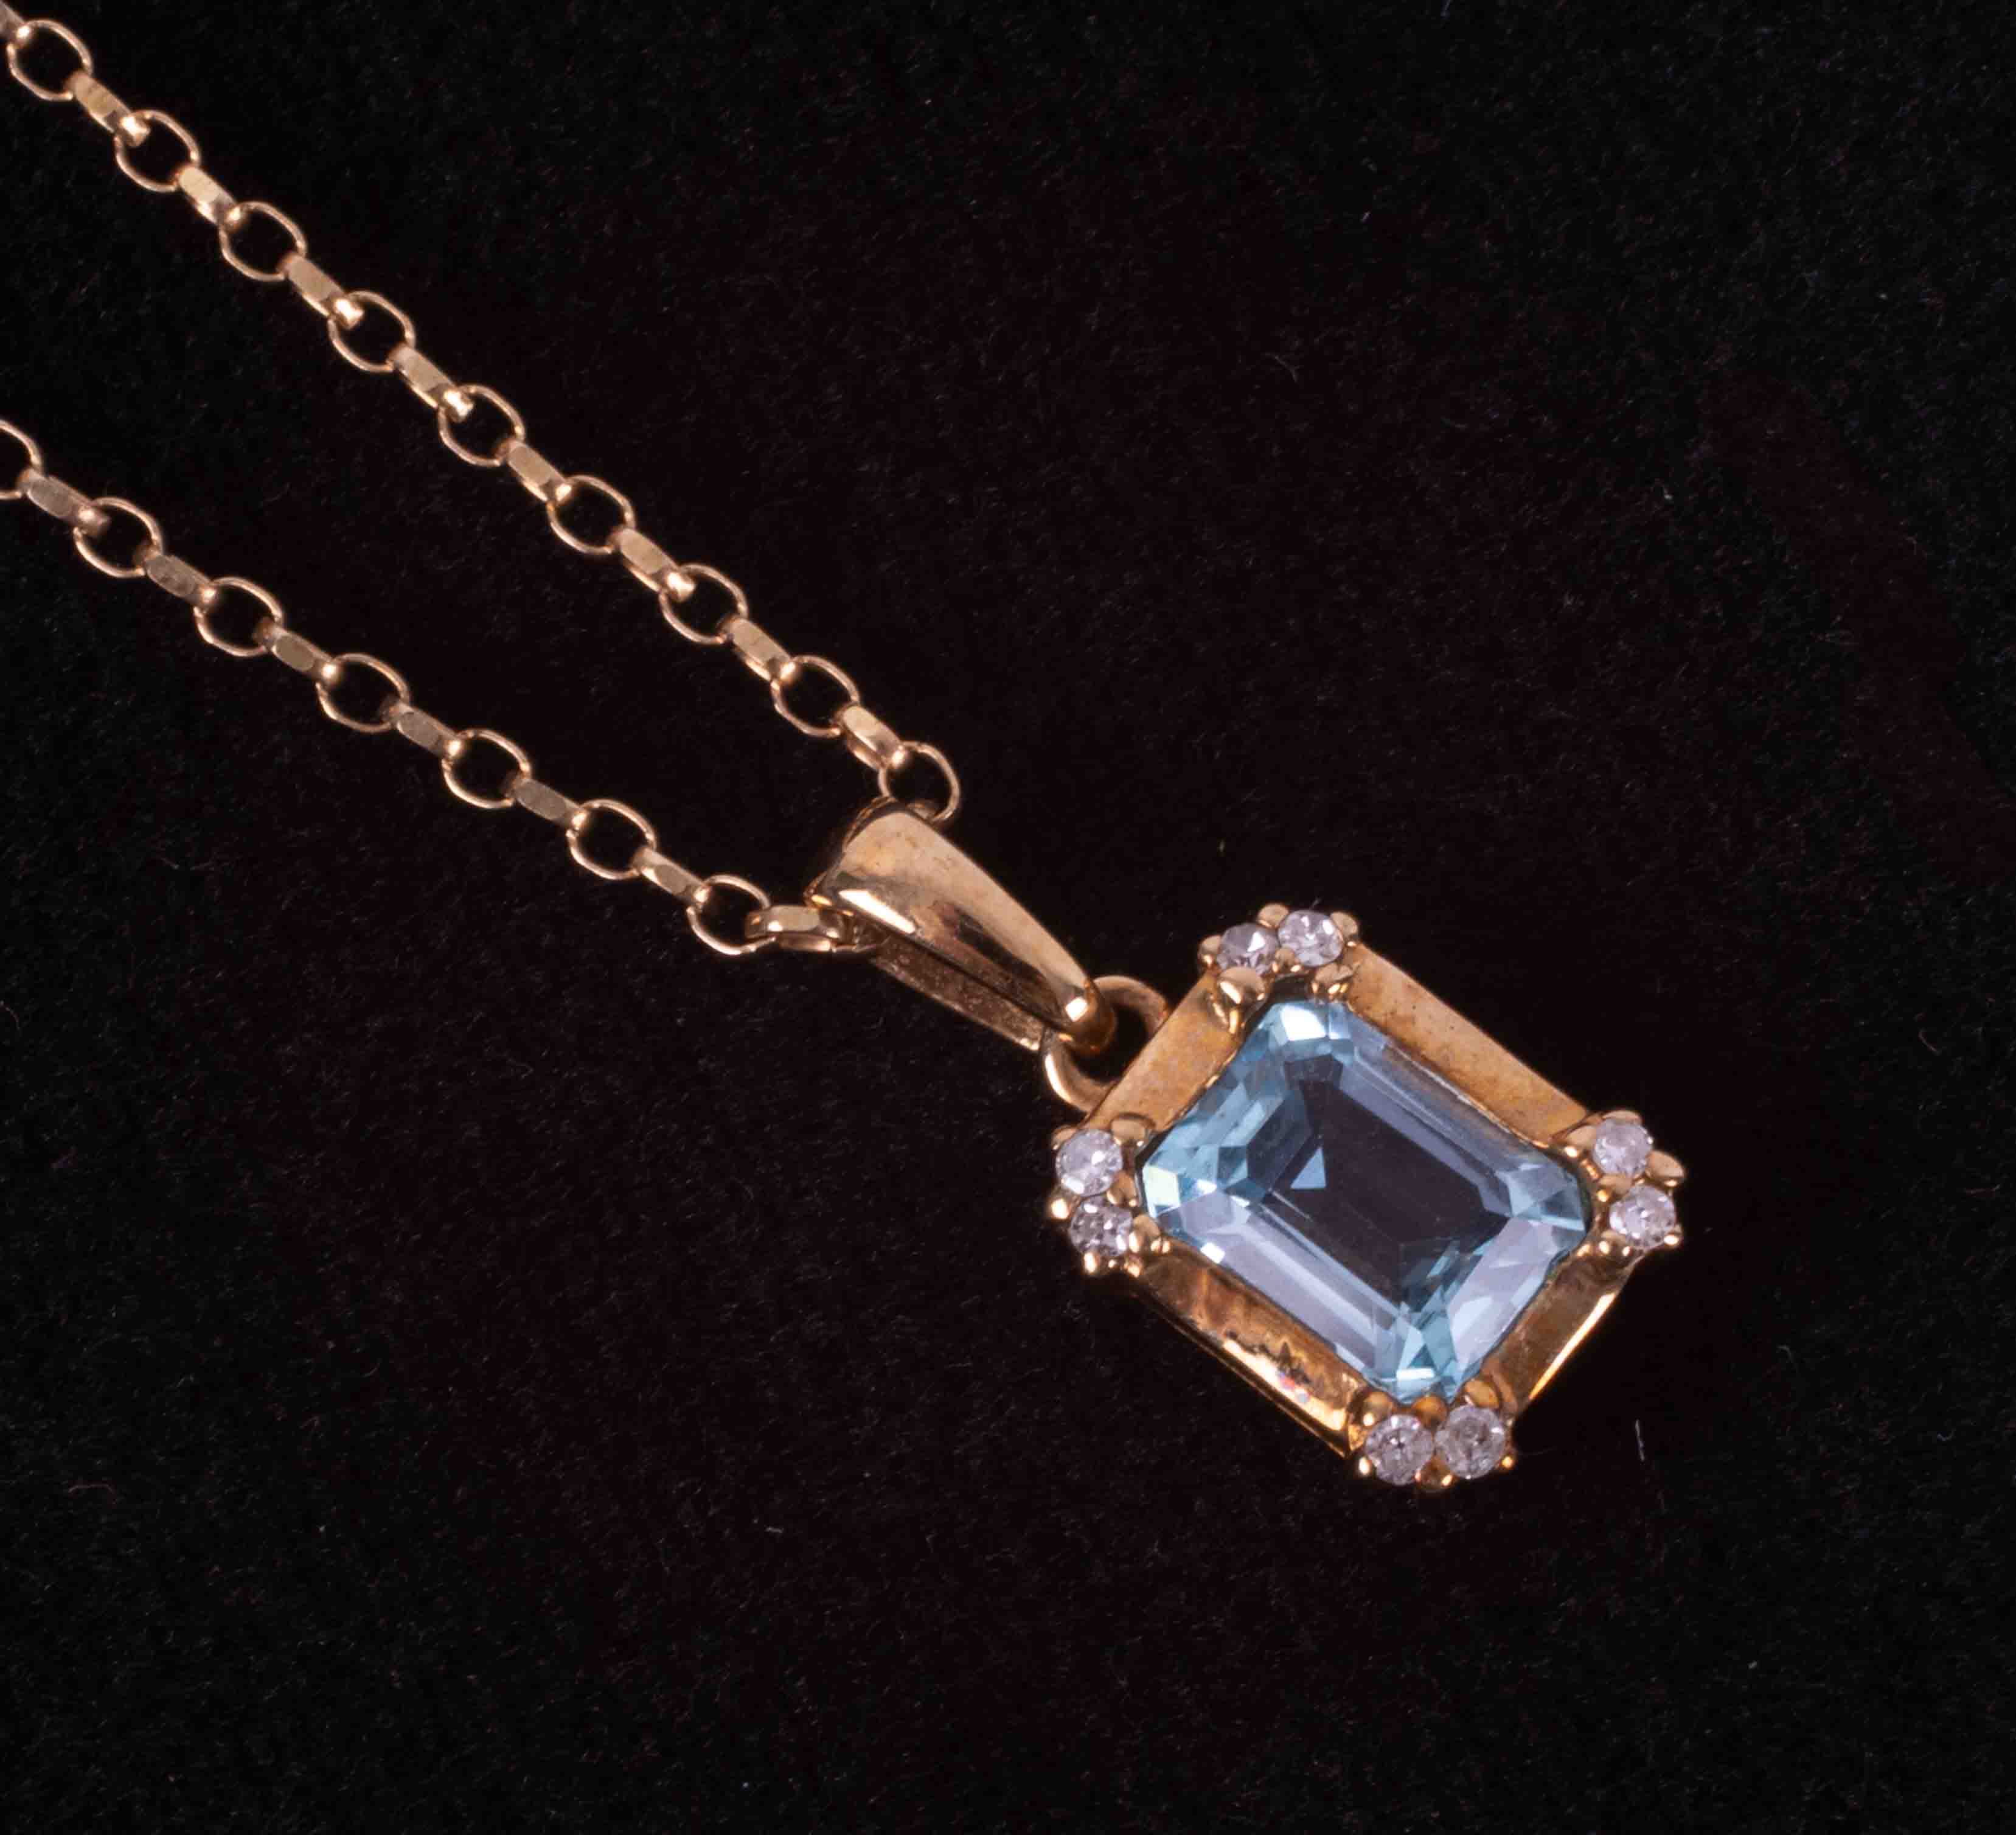 A 9ct yellow gold 20" open link chain with a 9ct yellow gold pendant set with an emerald cut